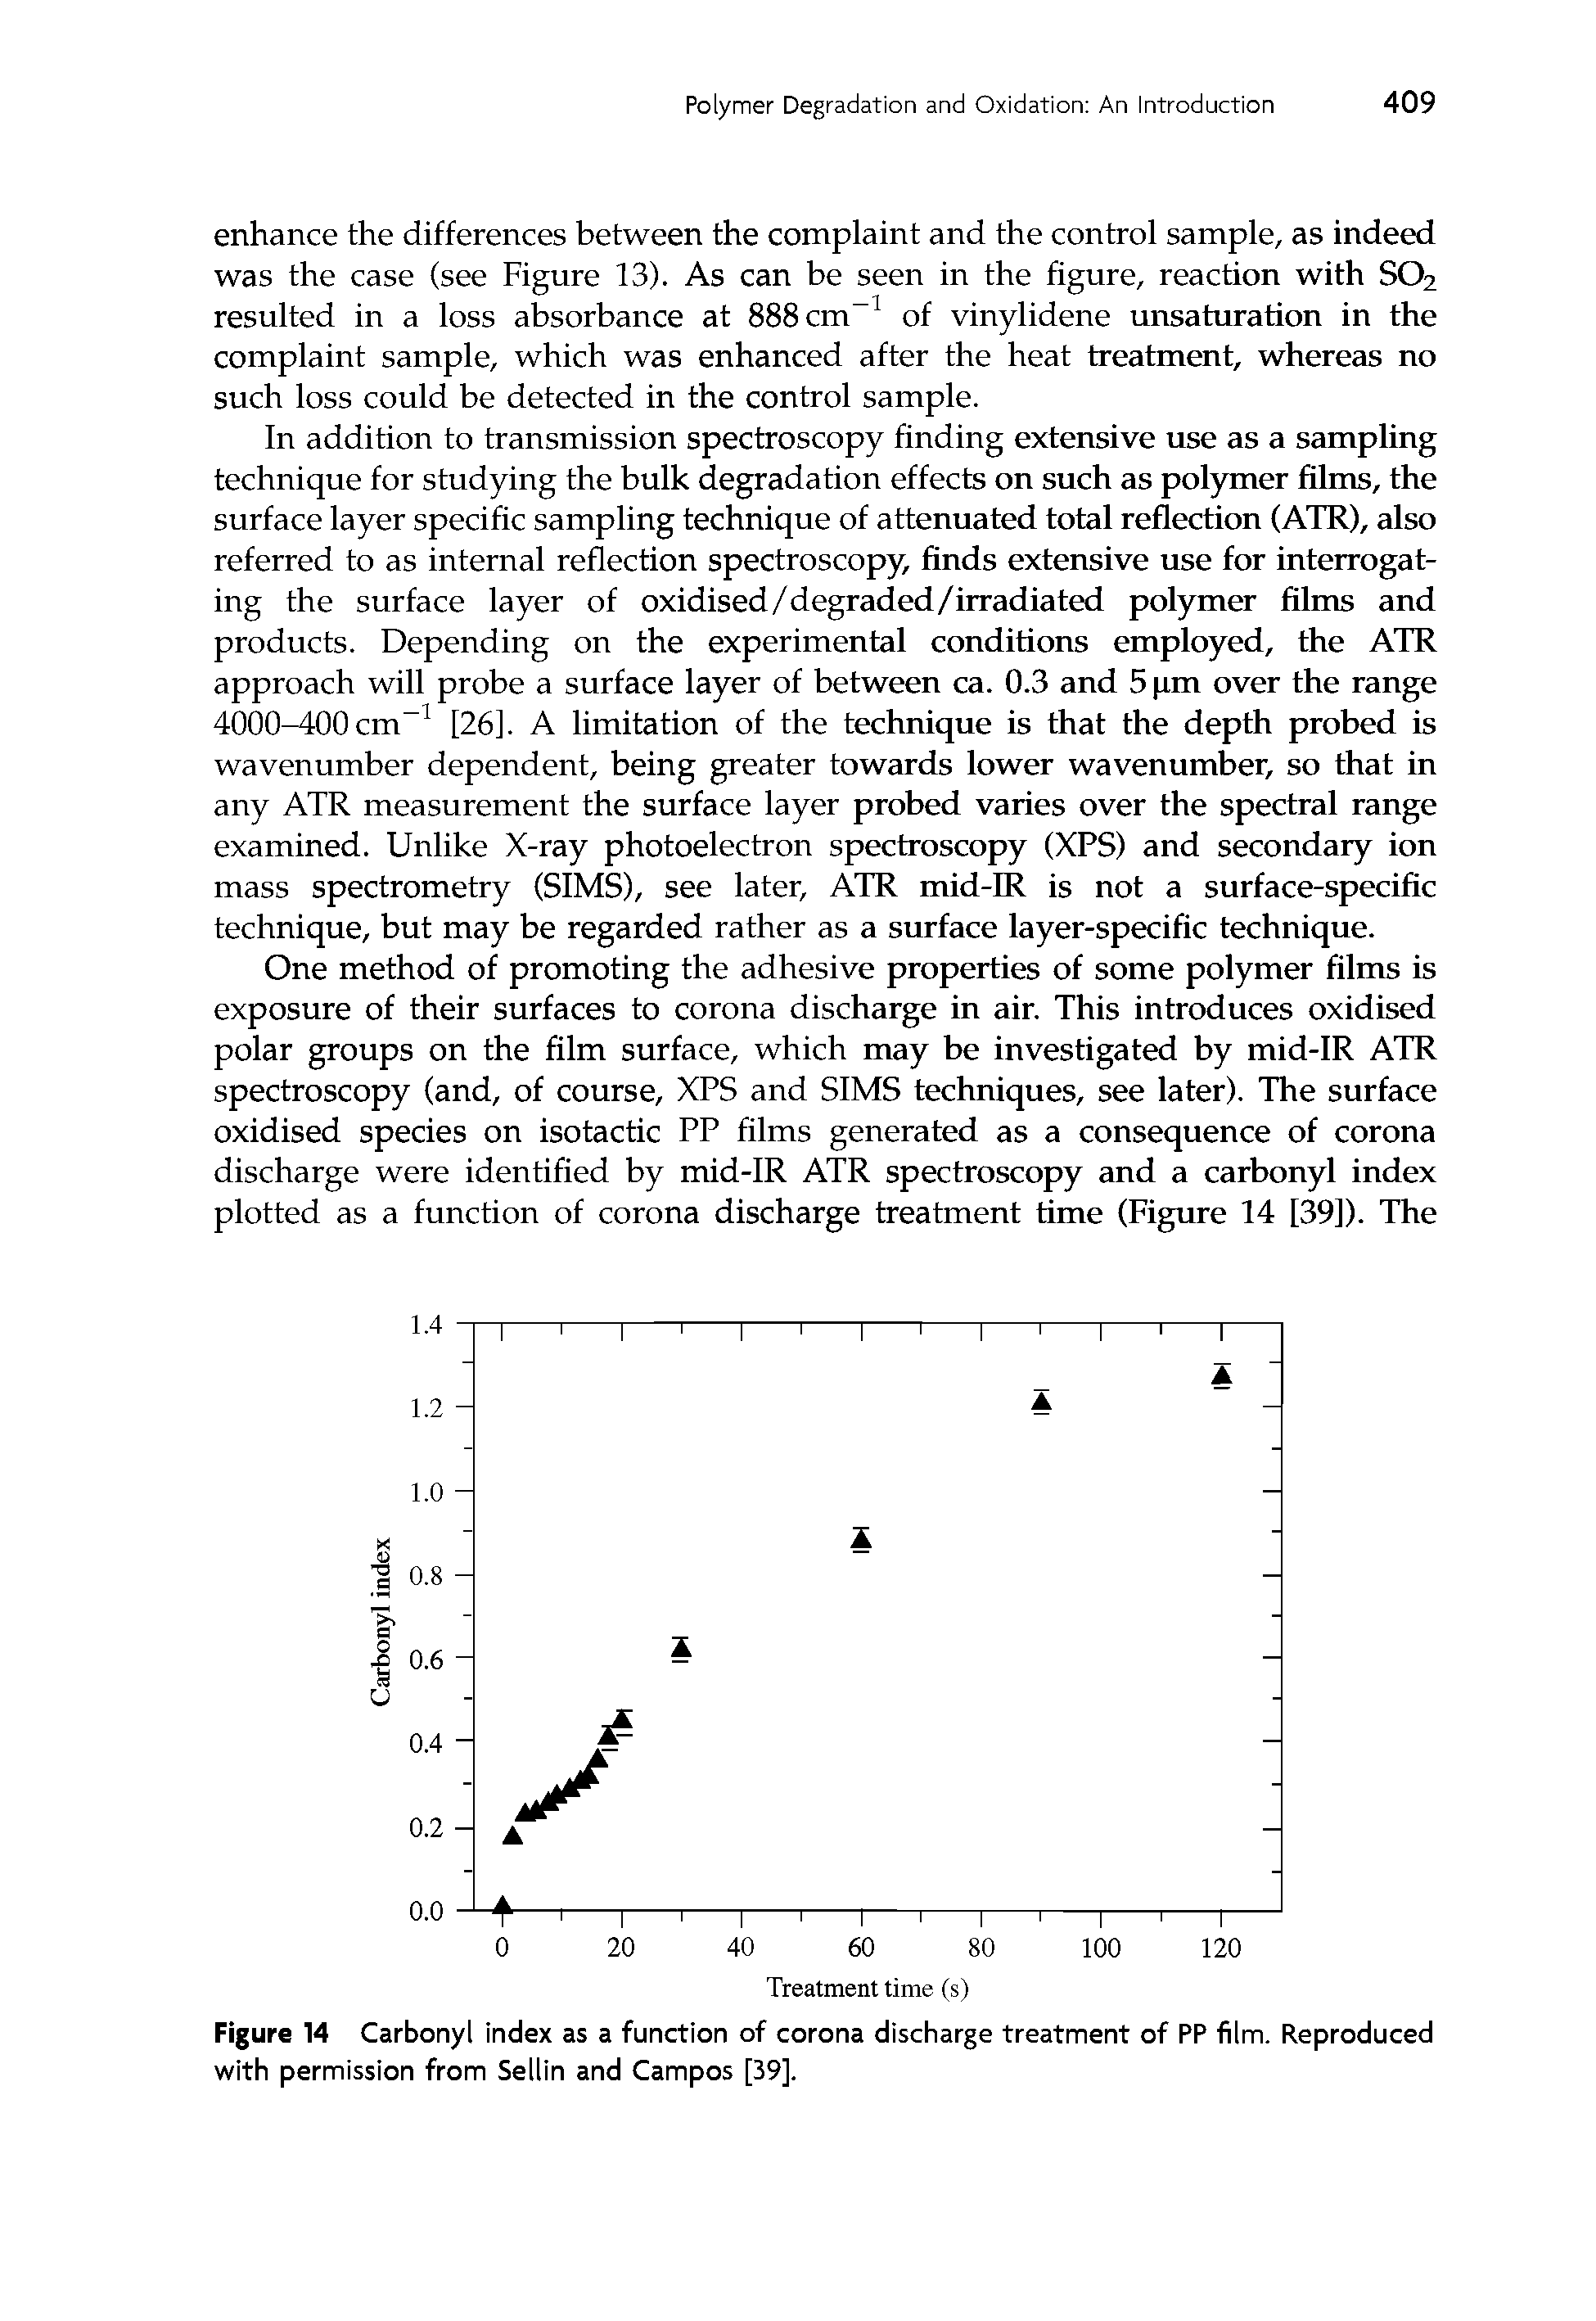 Figure 14 Carbonyl index as a function of corona discharge treatment of PP film. Reproduced with permission from Sellin and Campos [39].